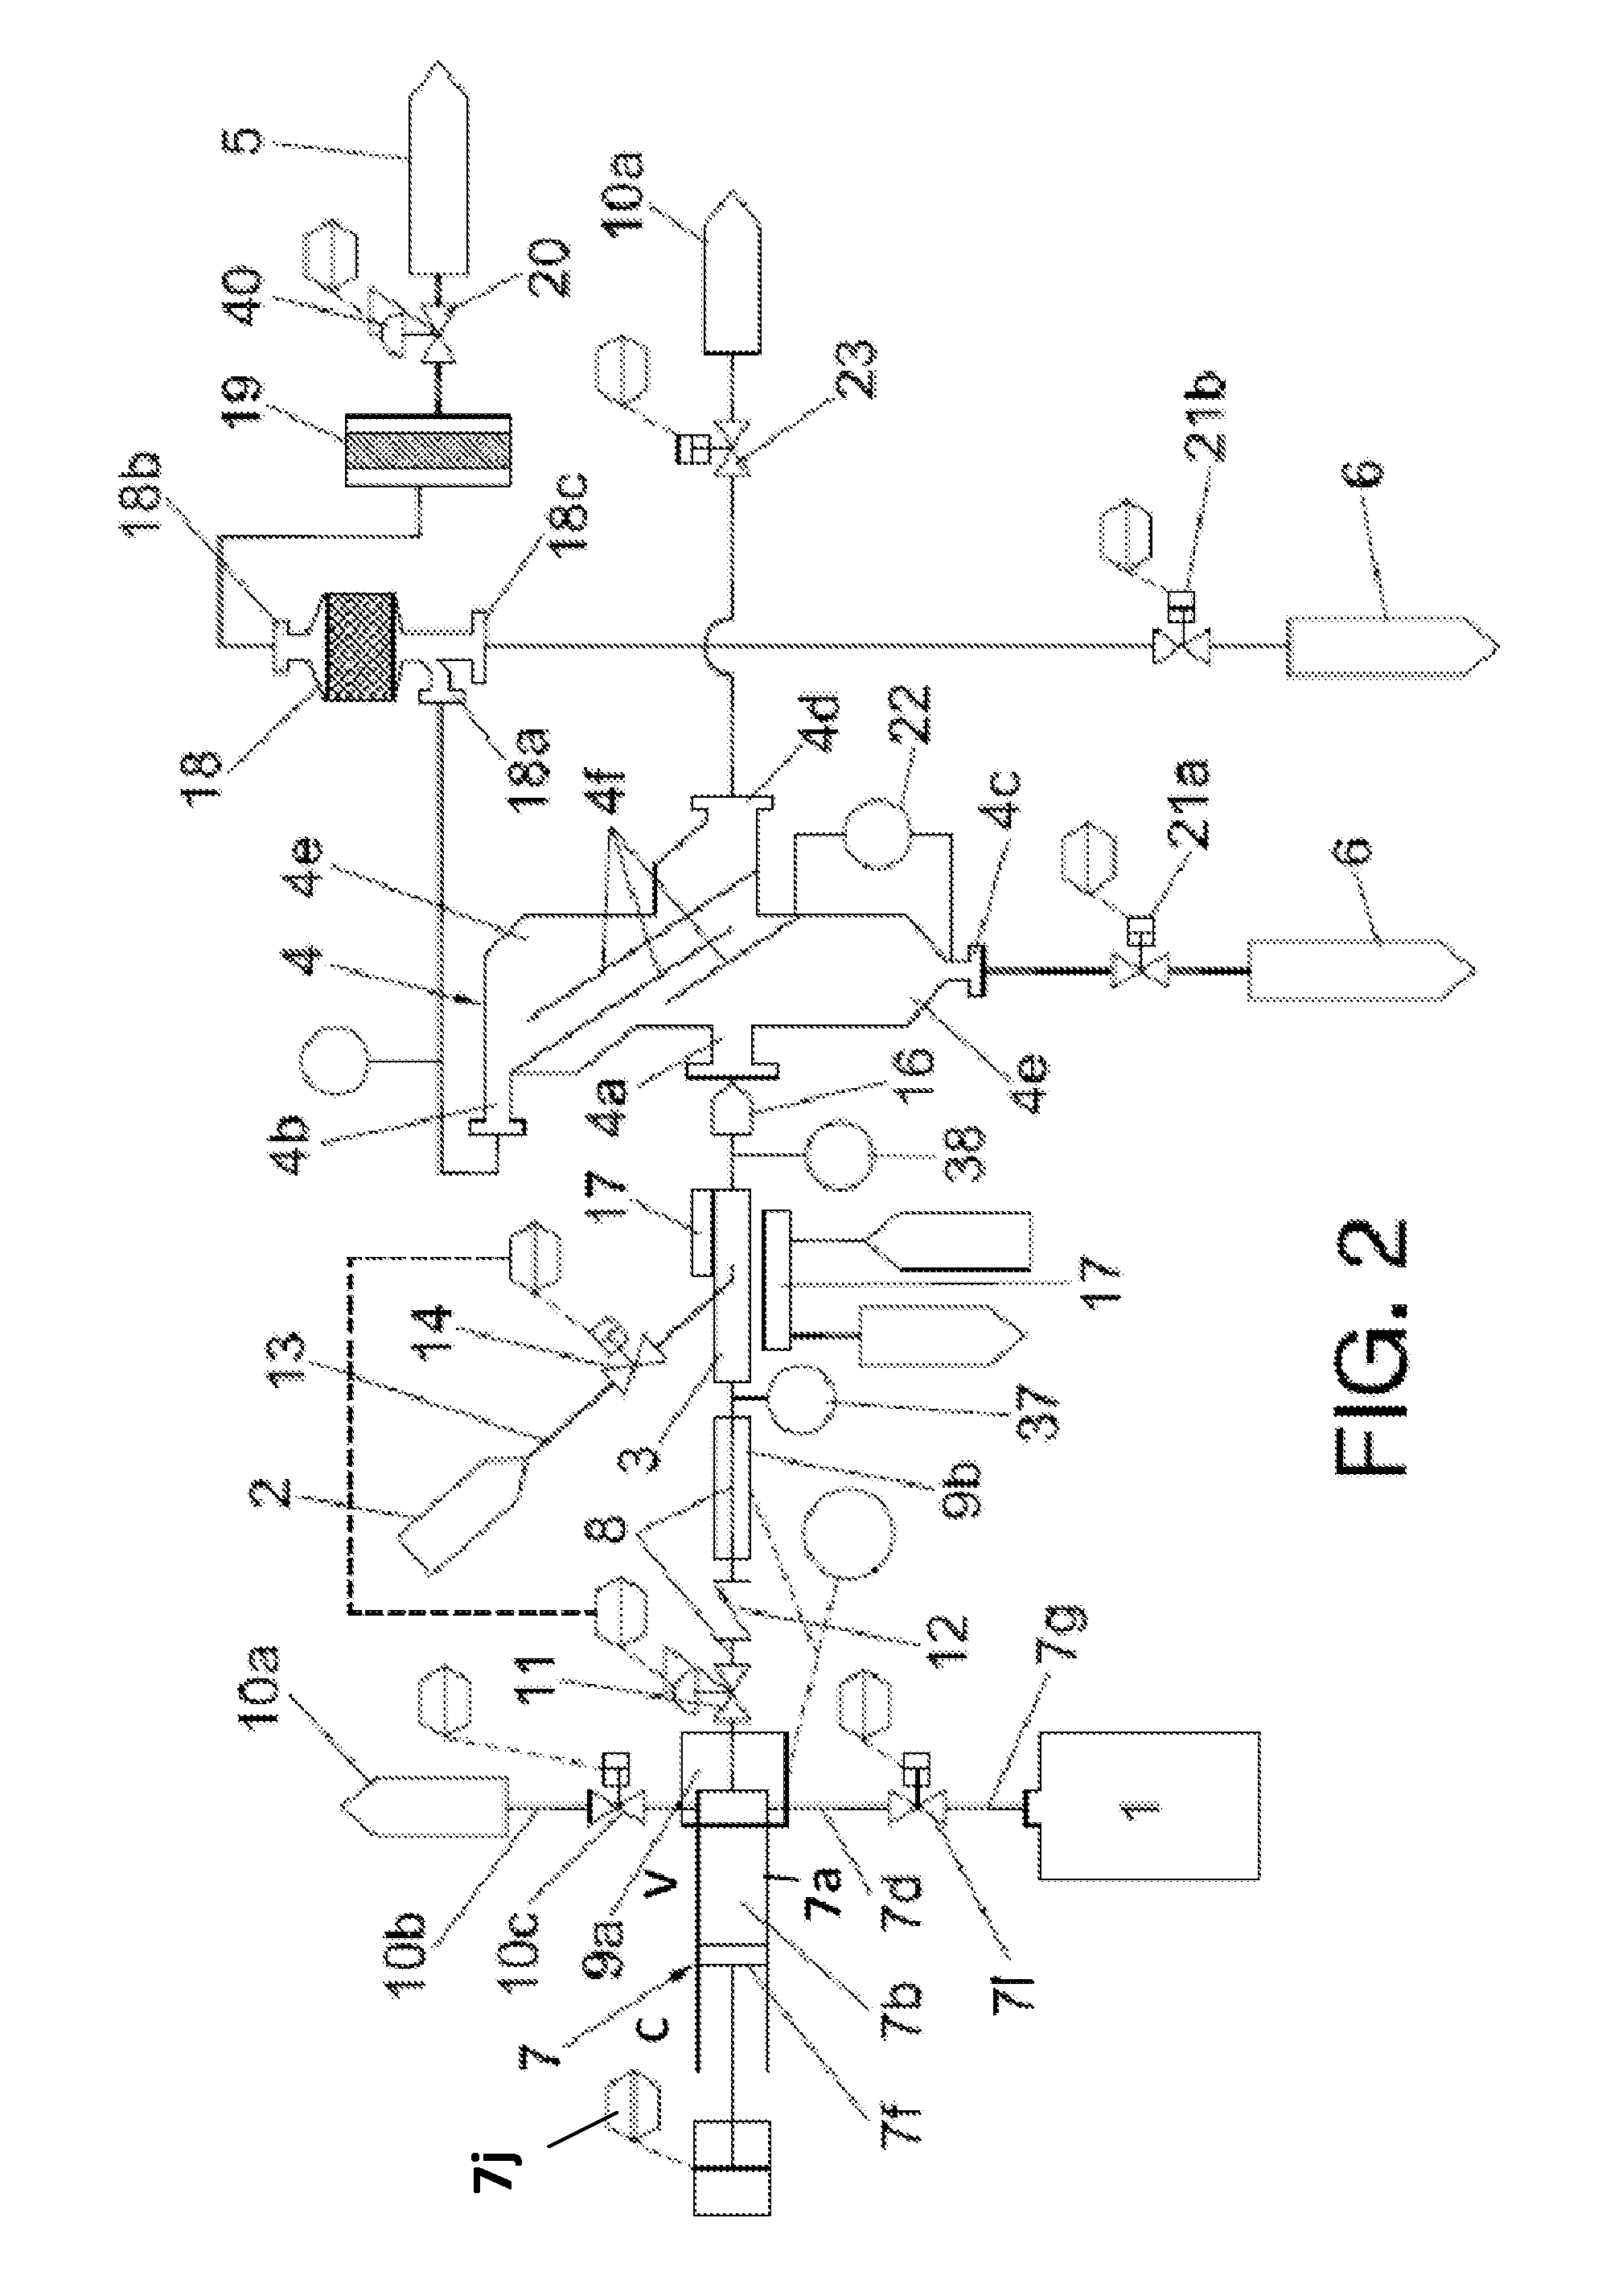 System for controlled on demand in situ hydrogen generation using a recyclable liquid metal reagent, and method used in the system